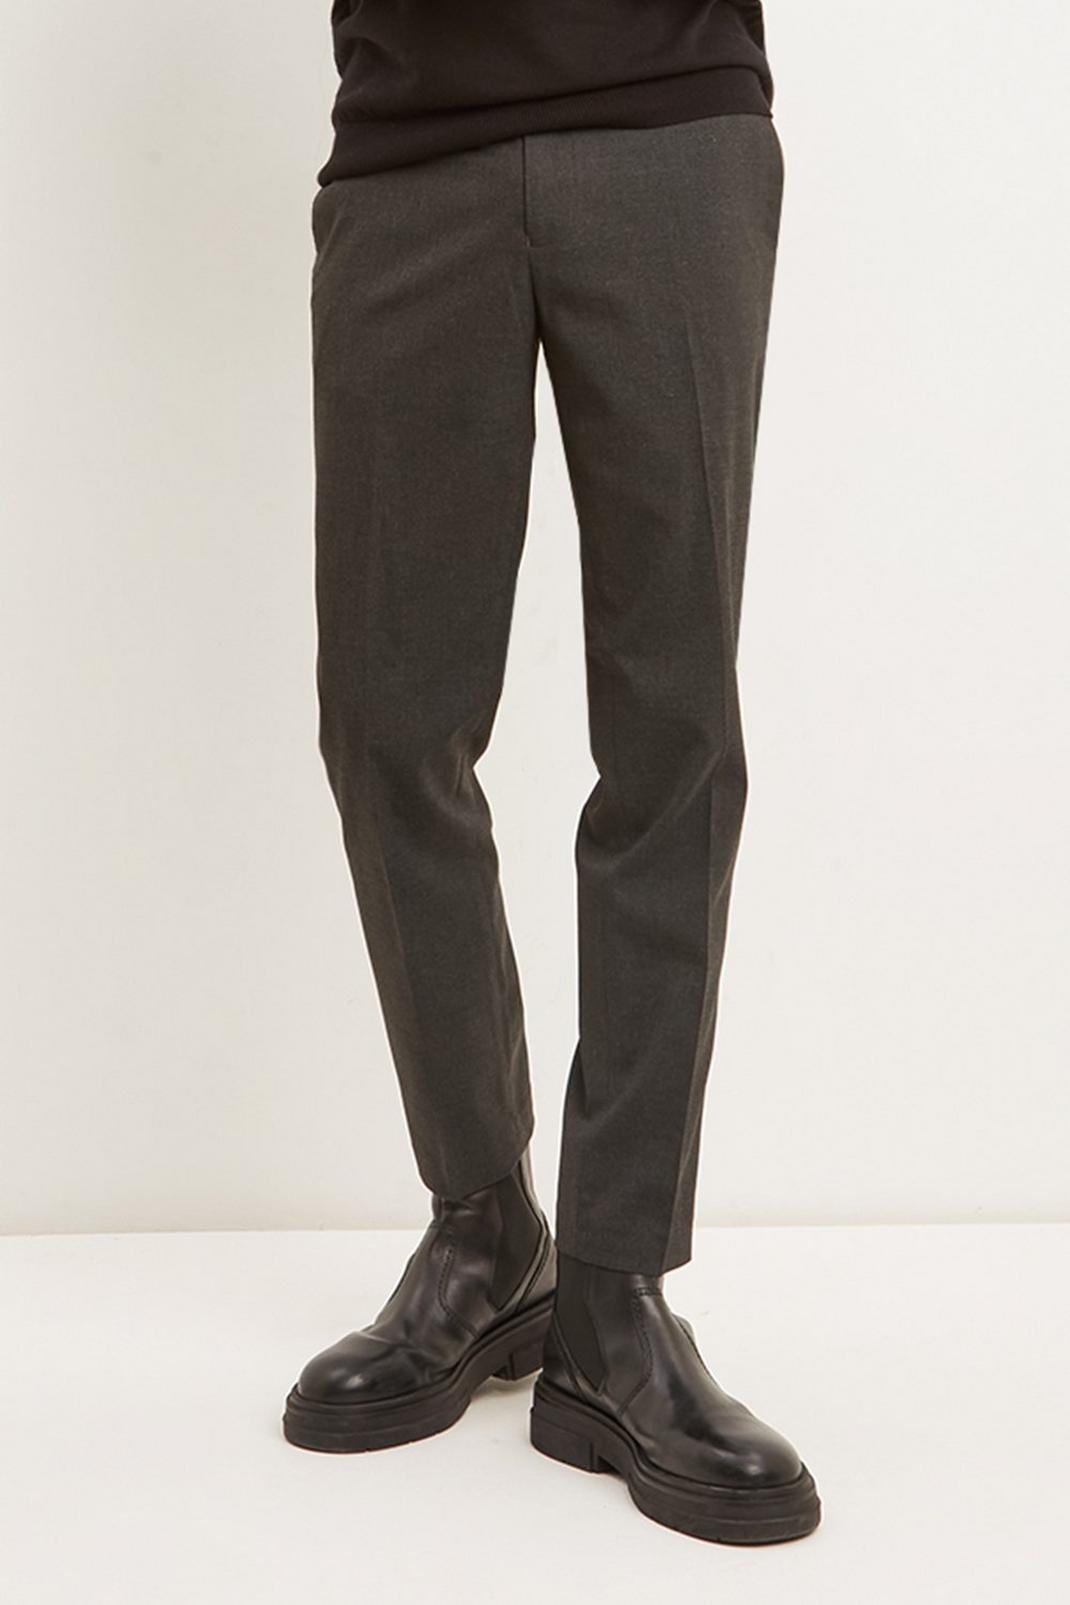 802 Skinny Charcoal Trouser  image number 1